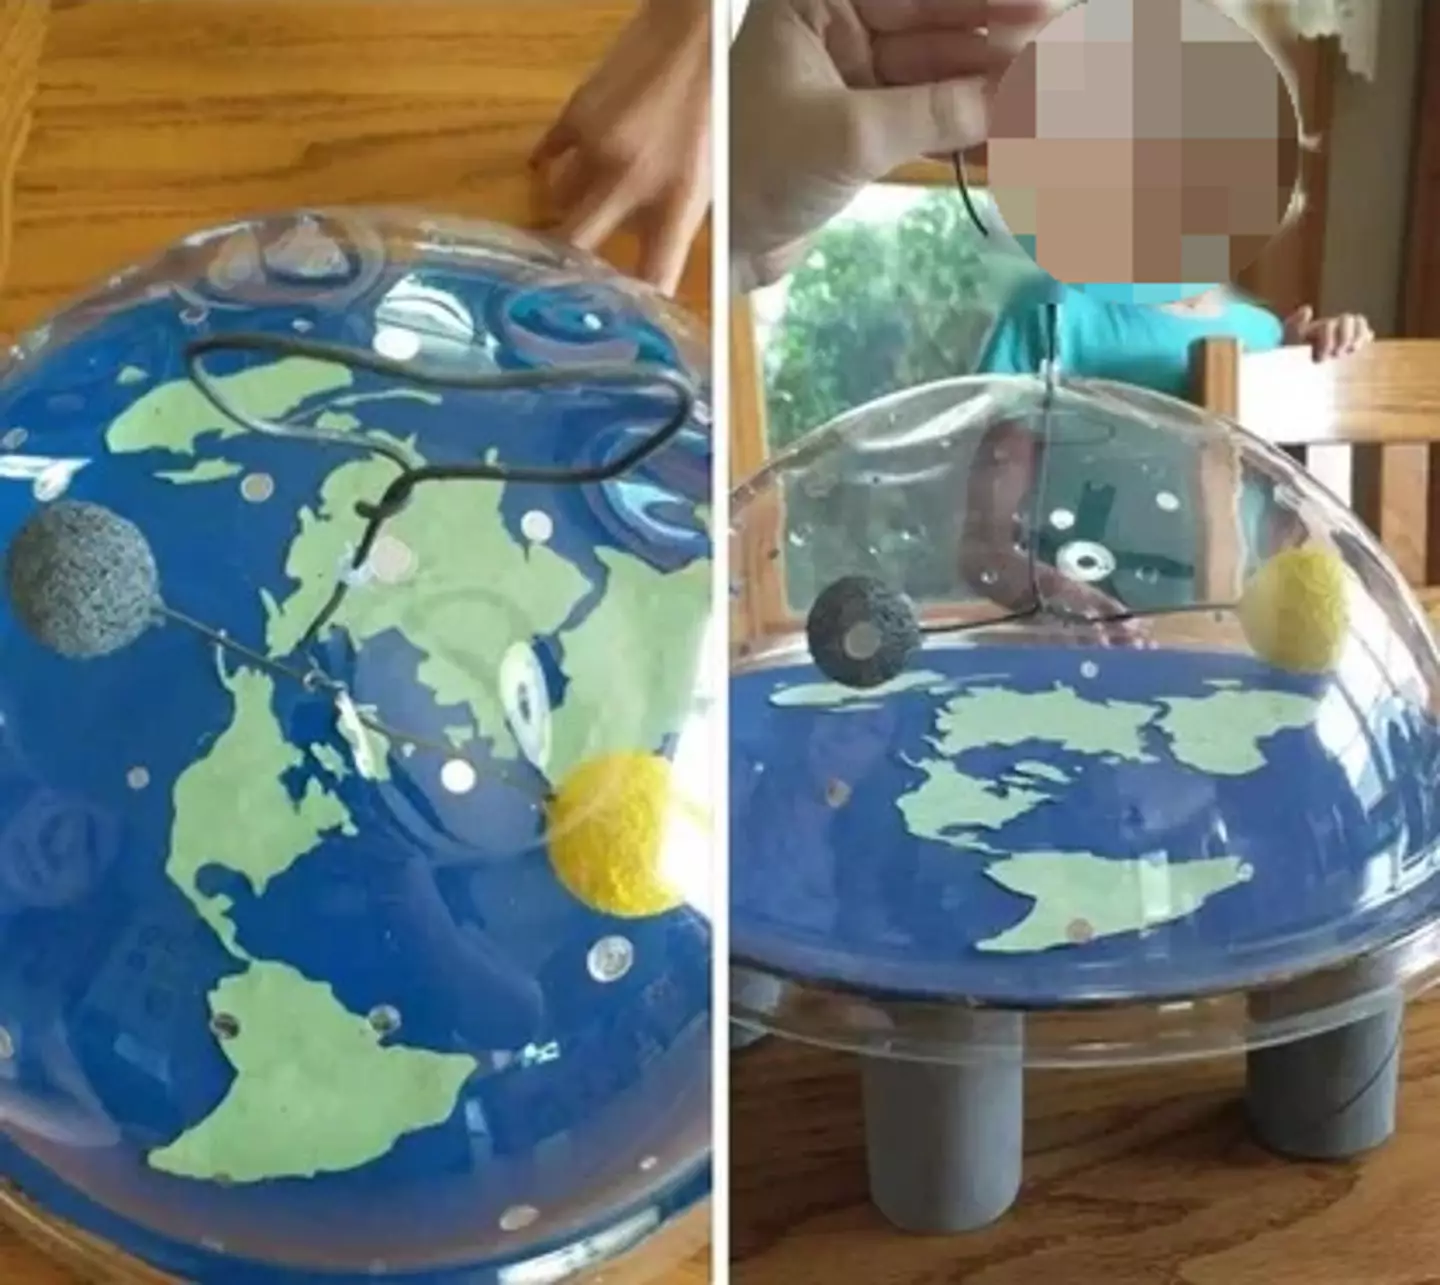 Flat earth parents have been teaching their kids the conspiracy theory.